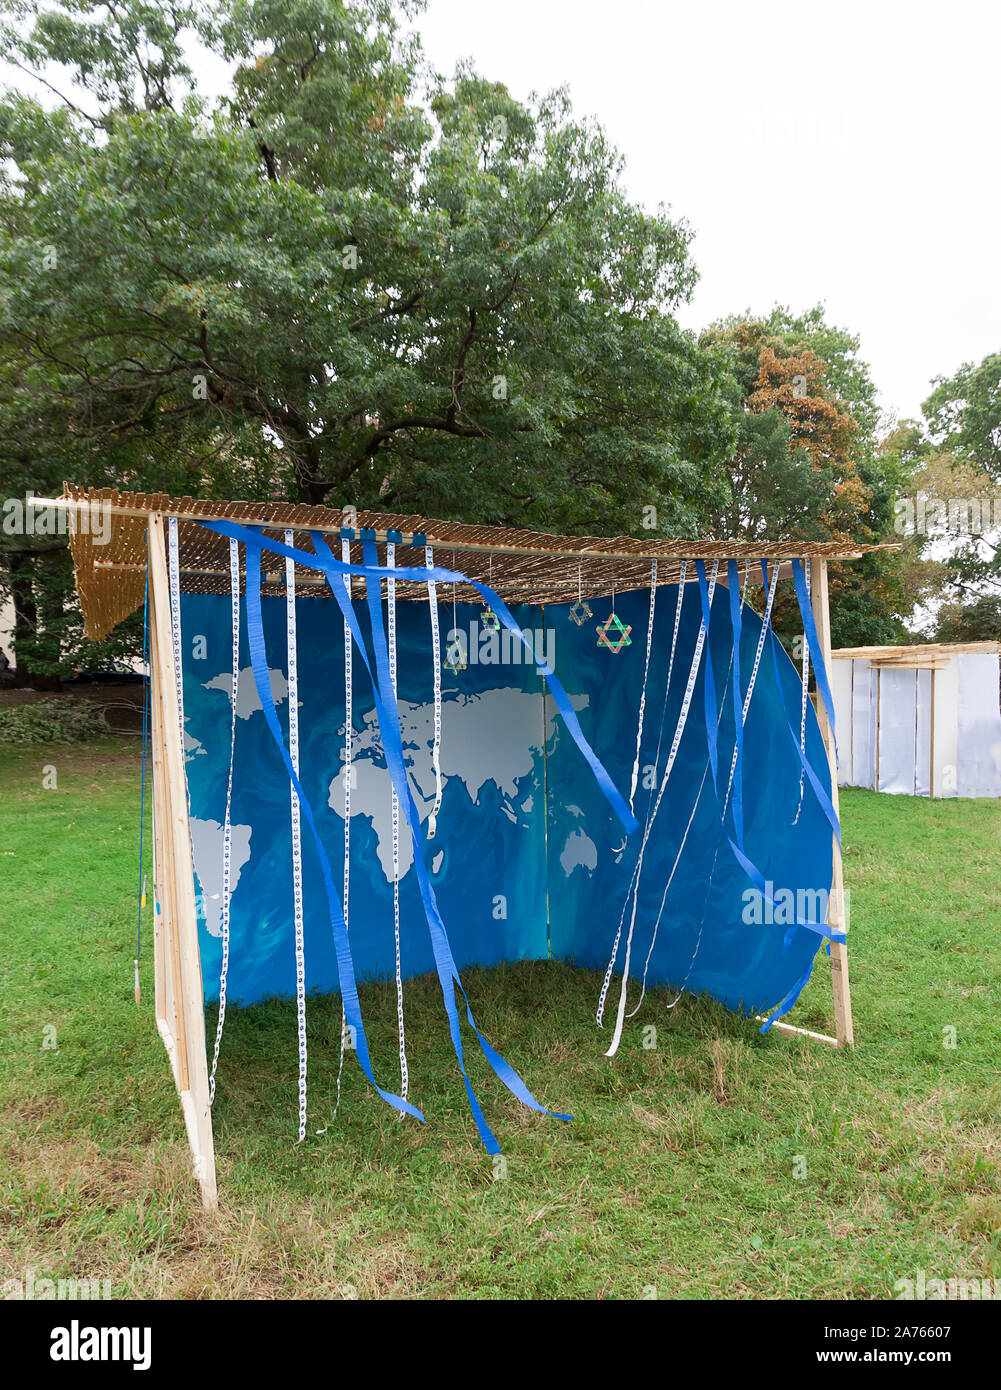 Sukkah, or Succah, temporary hut, on display for the Jewish holiday of Sukkoth. Stock Photo